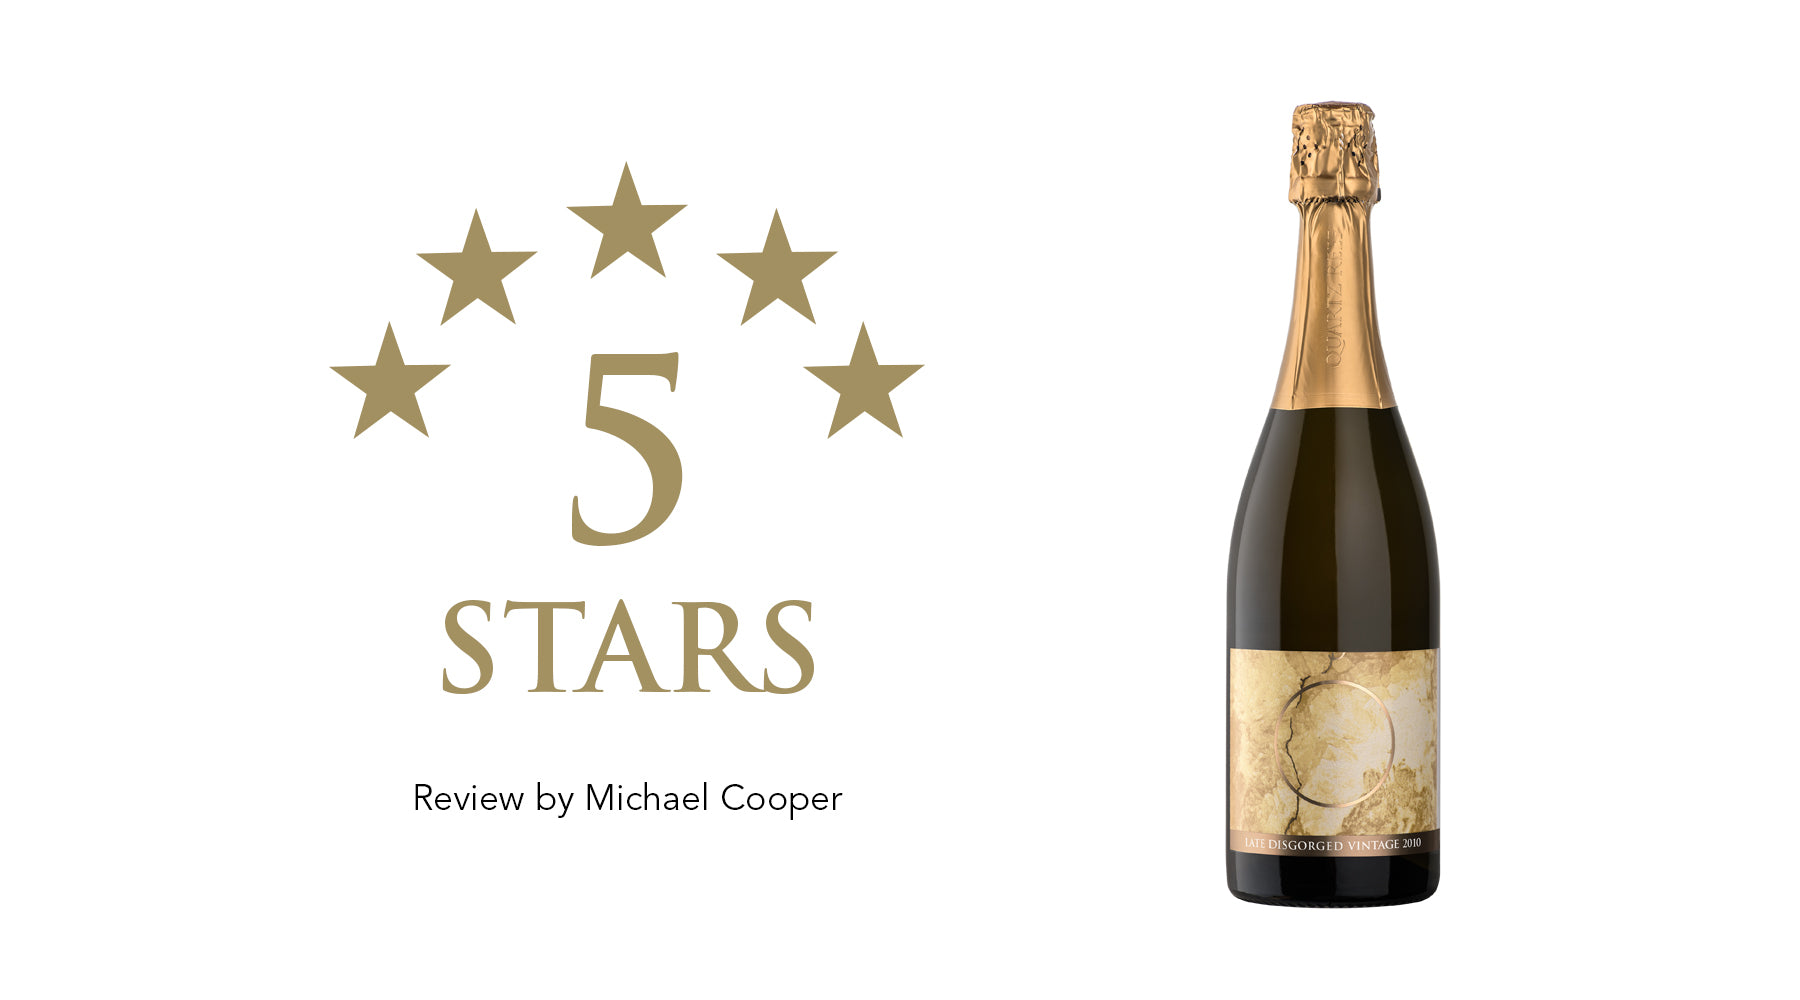 Late Disgorged Vintage 2010 - Awarded 5 Stars